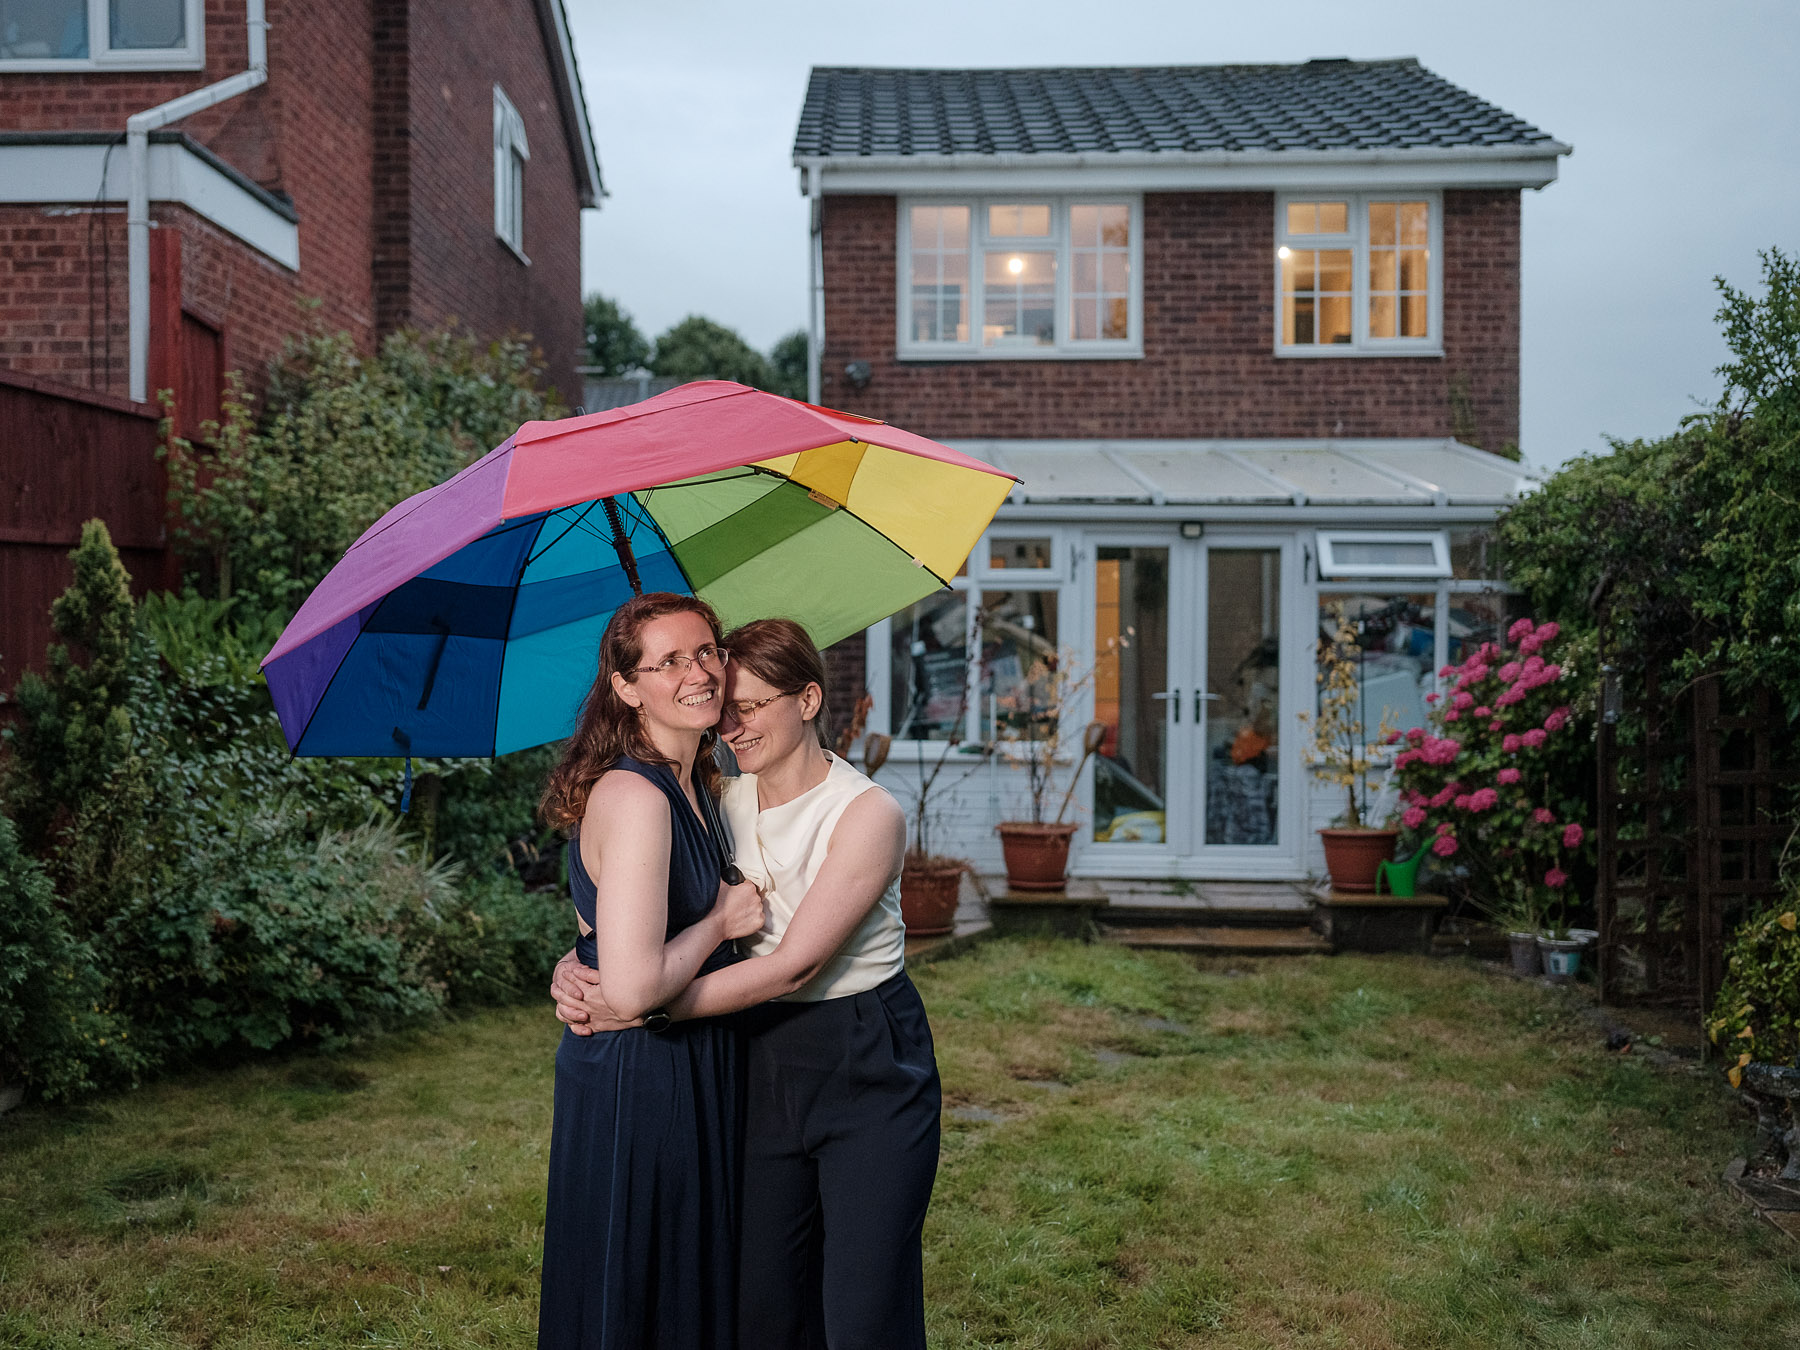 Ella and Crina are a gay Romanian couple who were able to get married in the UK